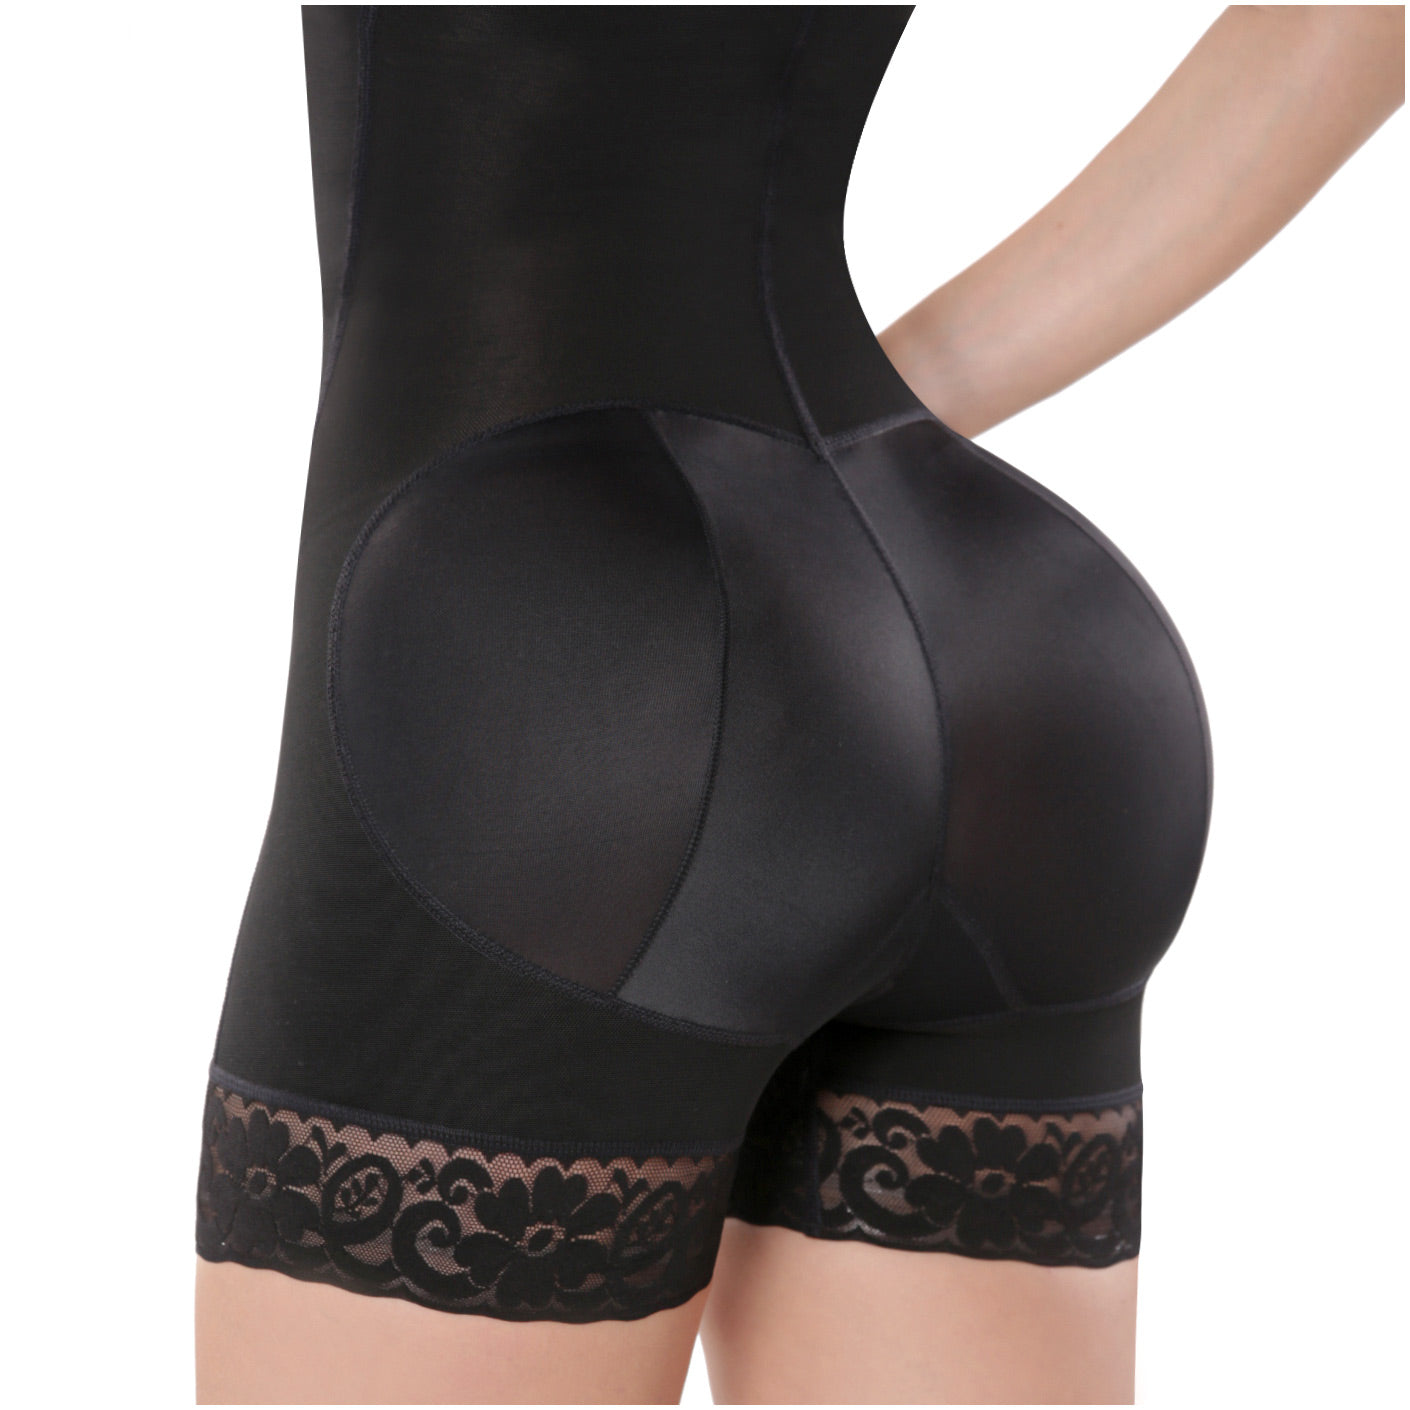 Diane & Geordi 2396 | Open Bust Mid Thigh Postpartum Compression Shapewear | Girdle after Pregnancy & Butt Lifting Body Shaper for Daily Use | Powernet